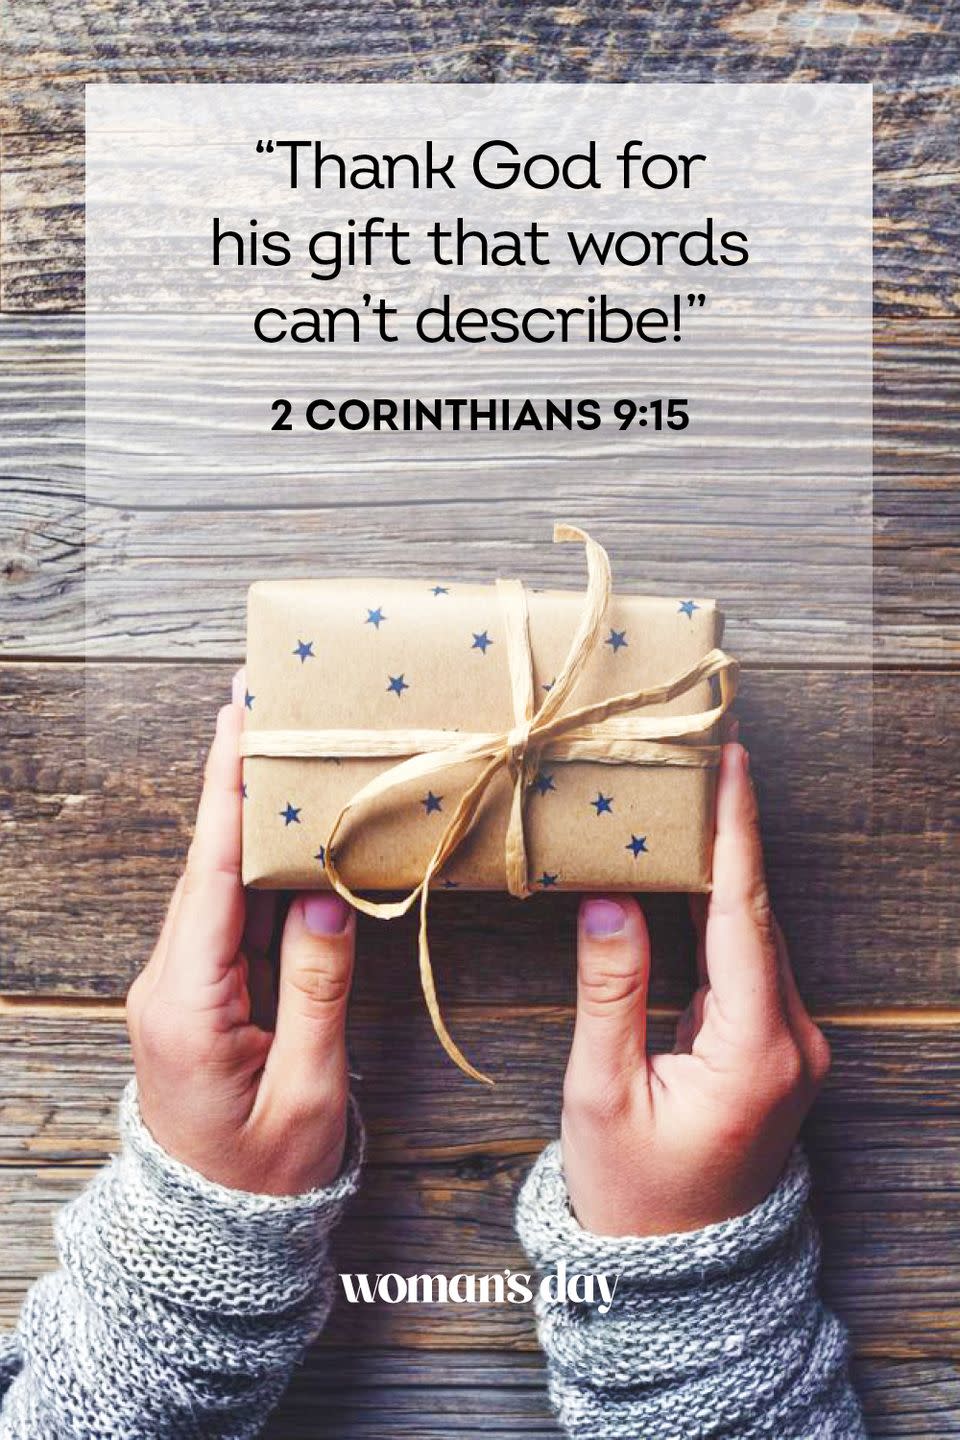 30 Bible Verses to Celebrate Your Loved One's Birthday